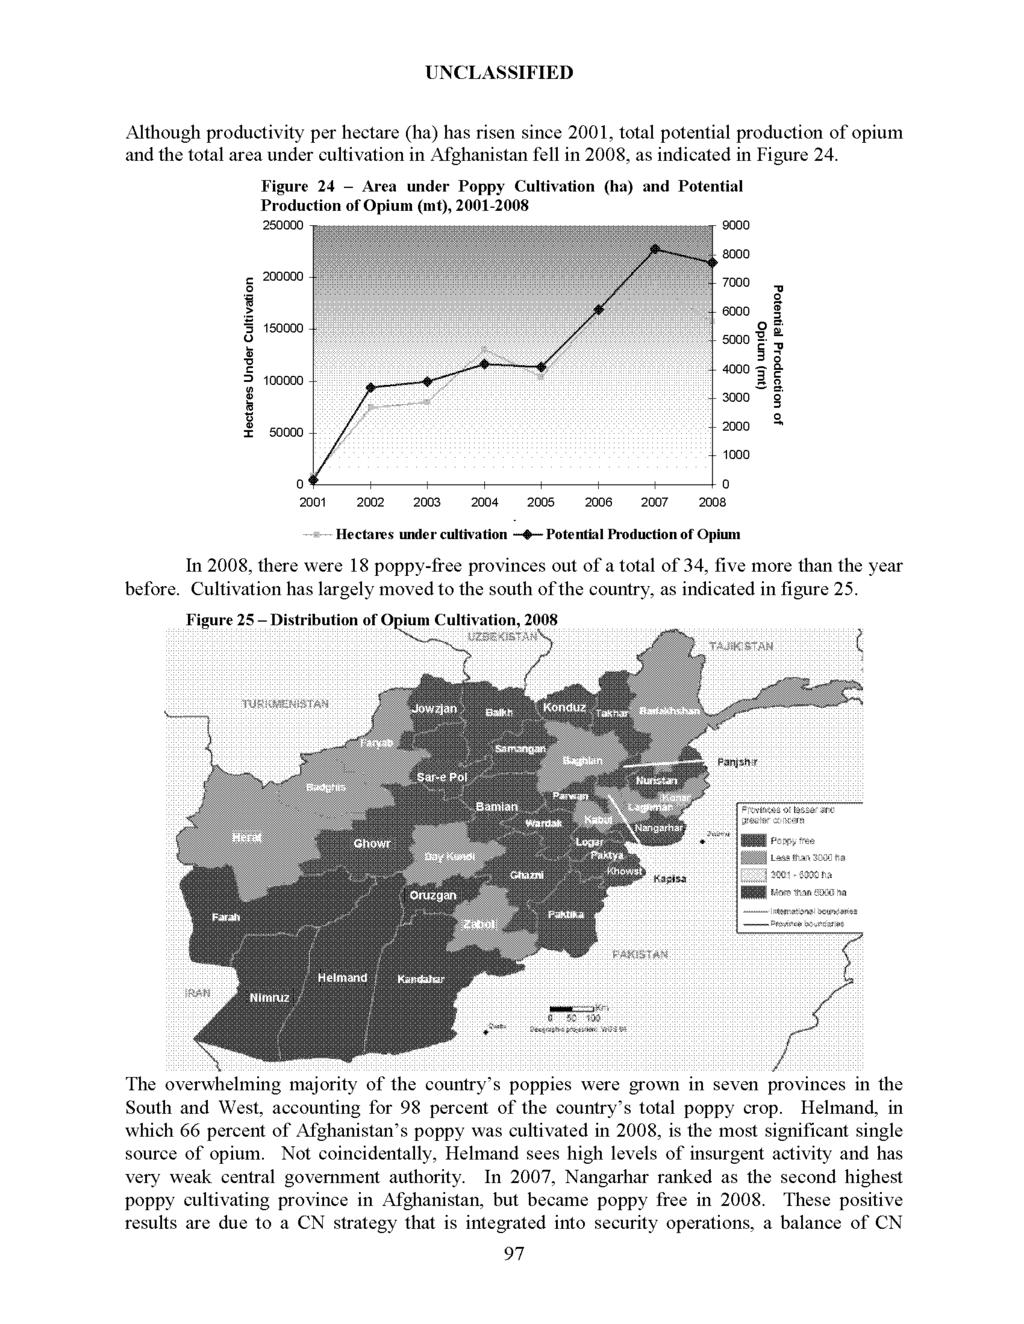 Although productivity per hectare (ha) has risen since 2001, total potential production of opium and the total area under cultivation in Afghanistan fell in 2008, as indicated in Figure 24.